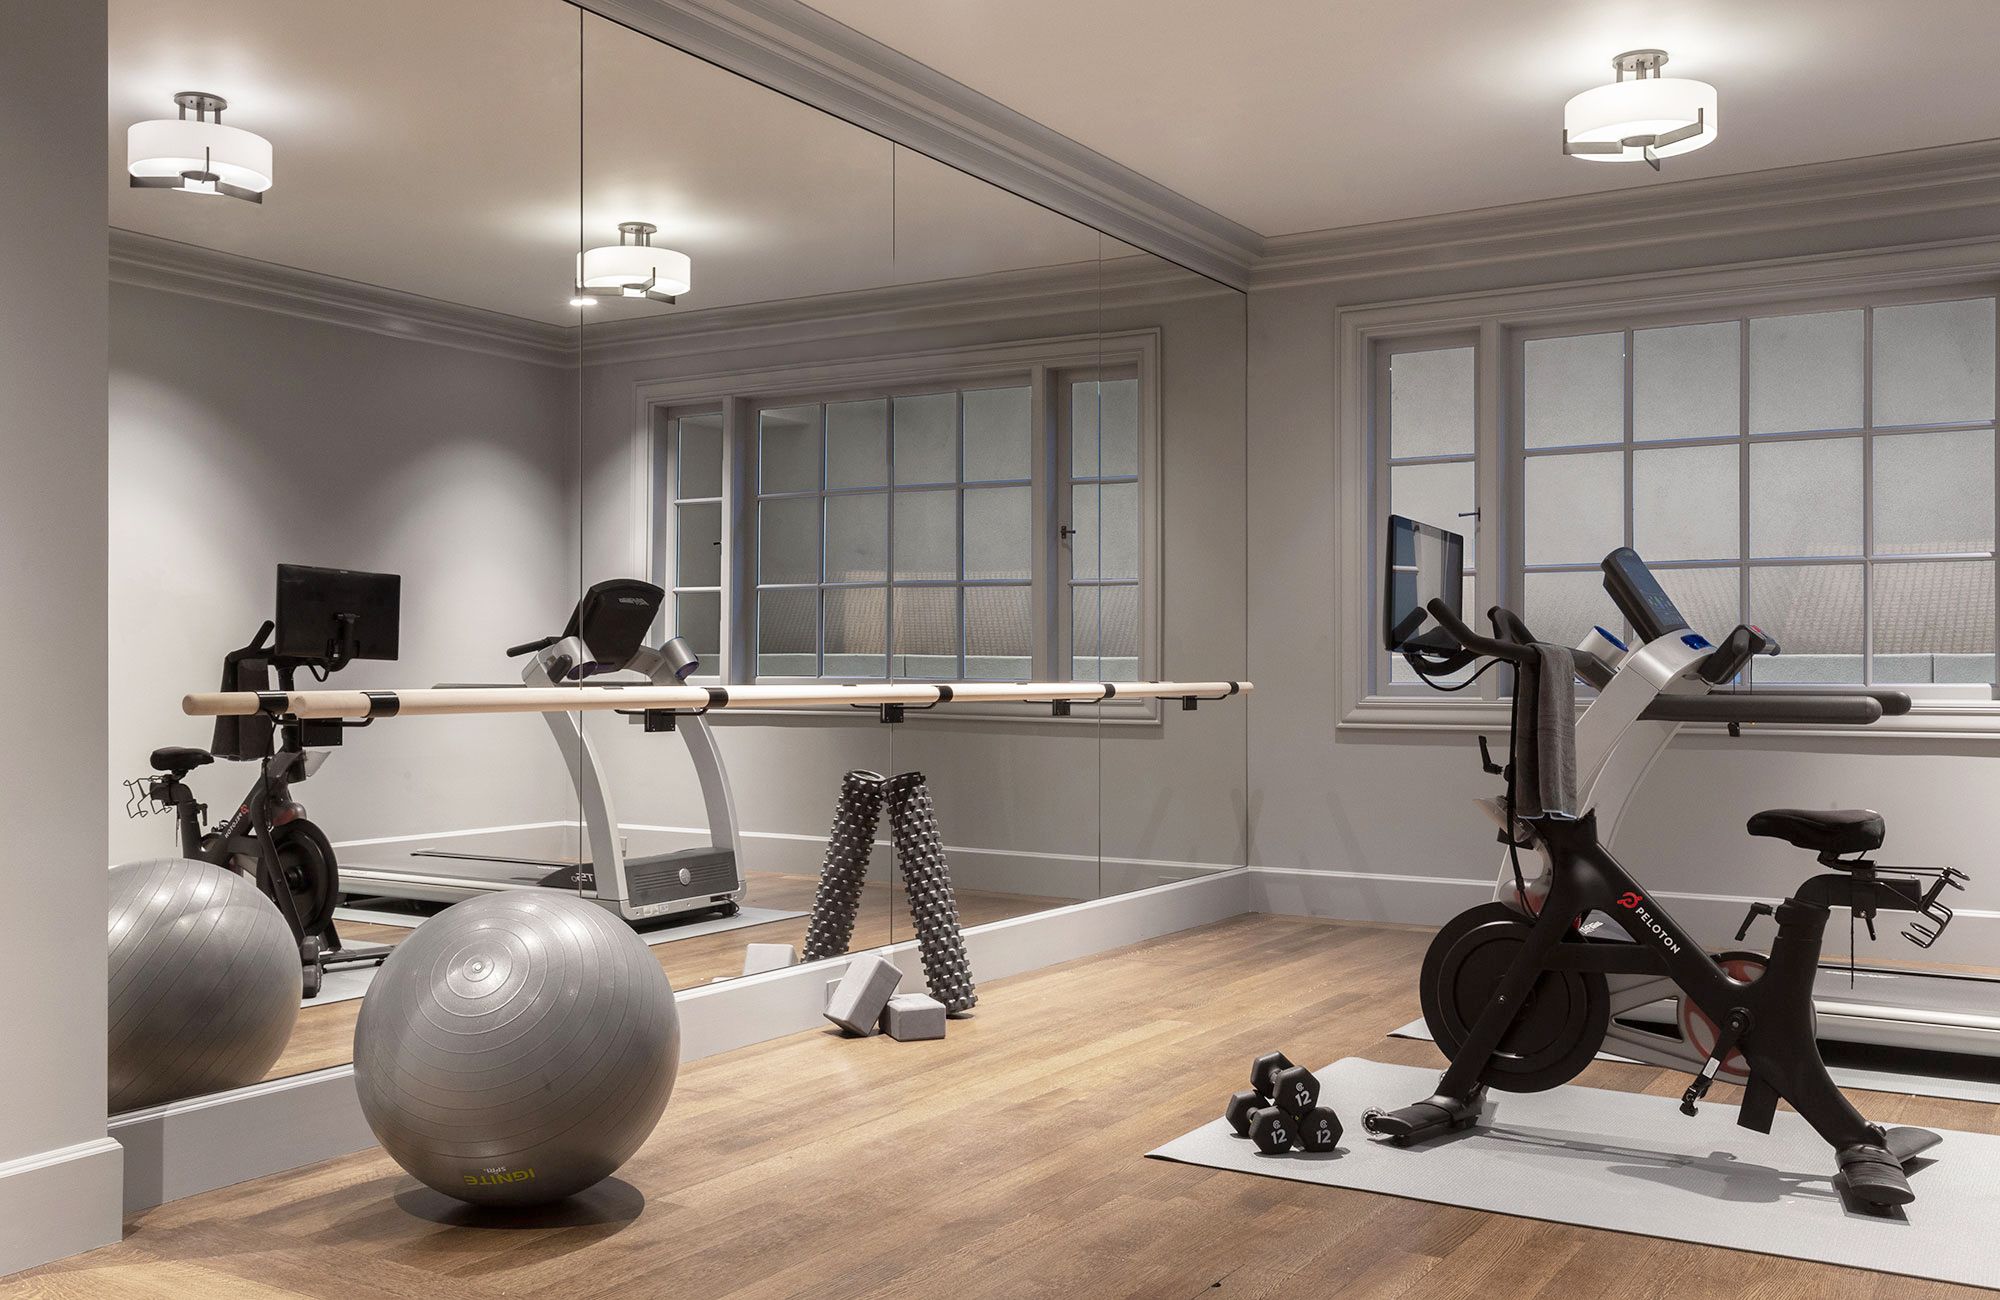 Exercise Room  Gym room at home, Workout room home, Workout room design